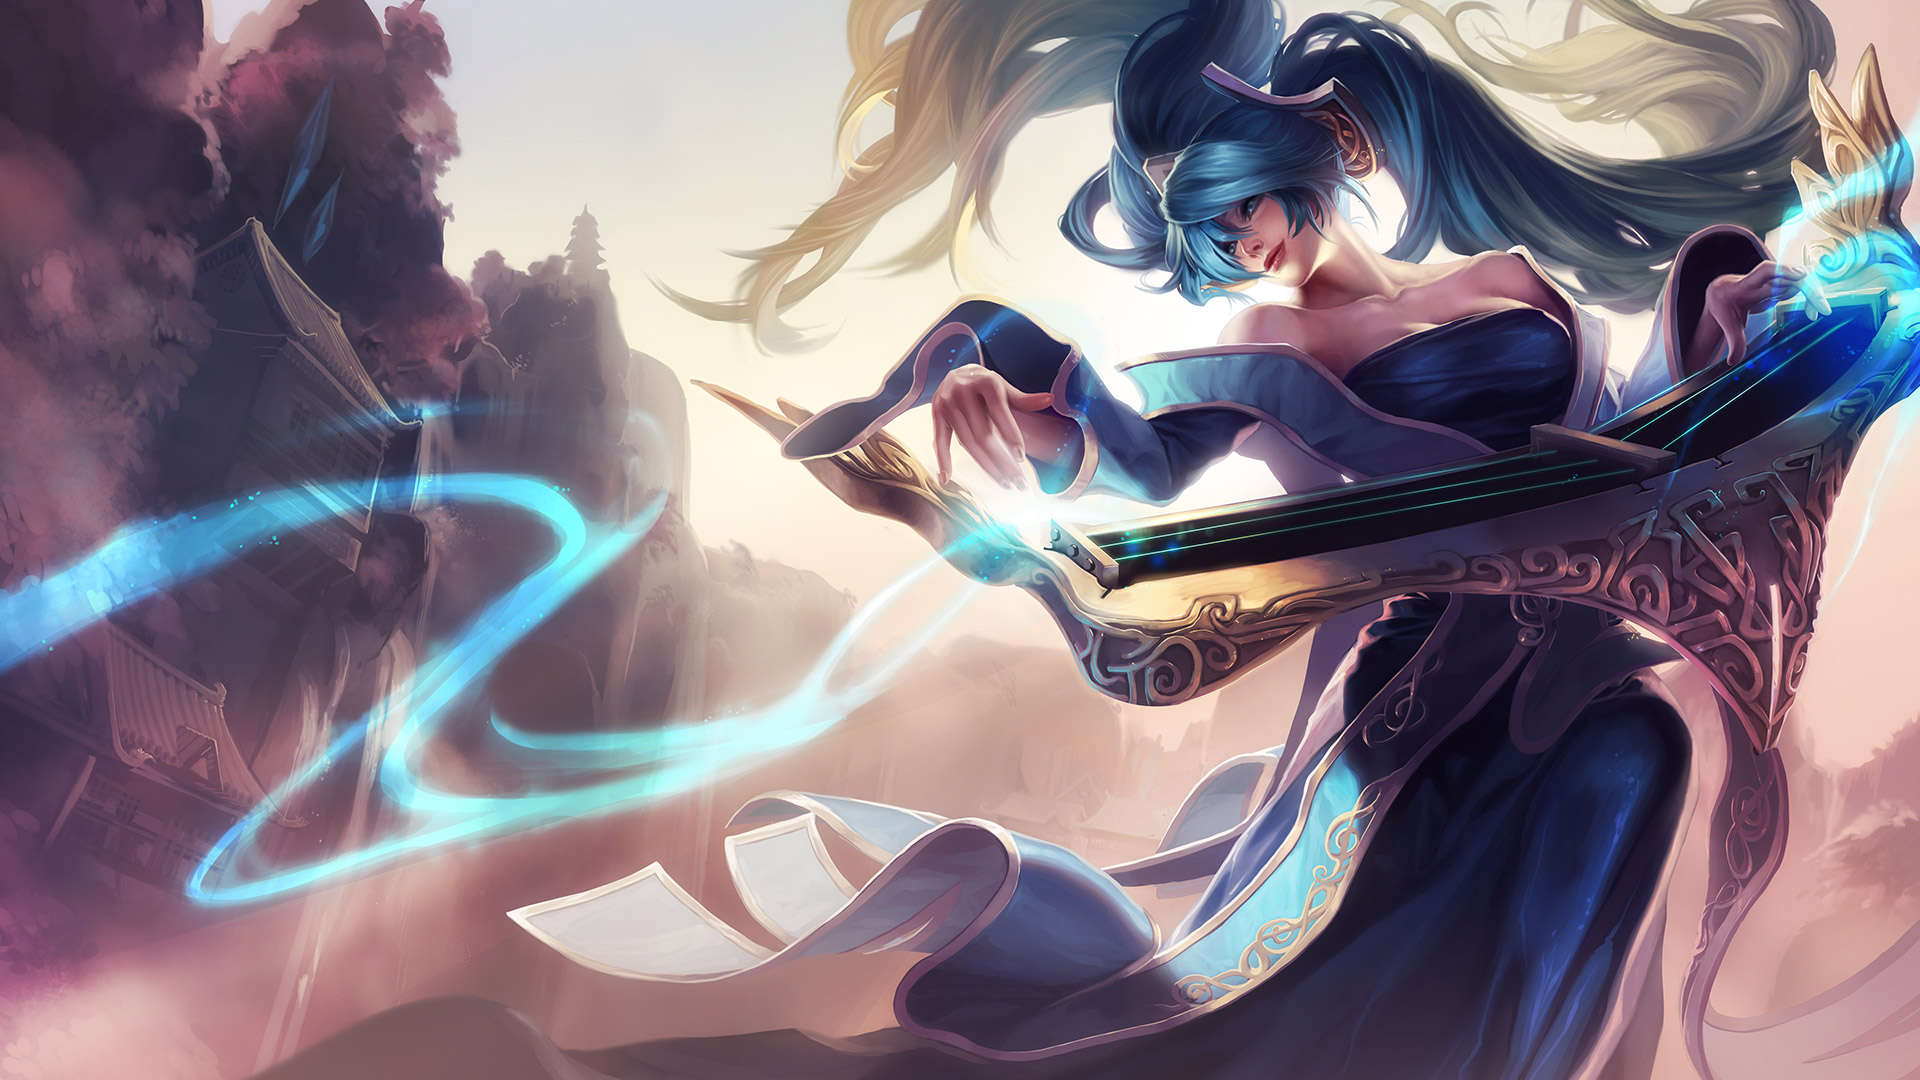 How to Boost Your Account in the Newest League of Legends Servers